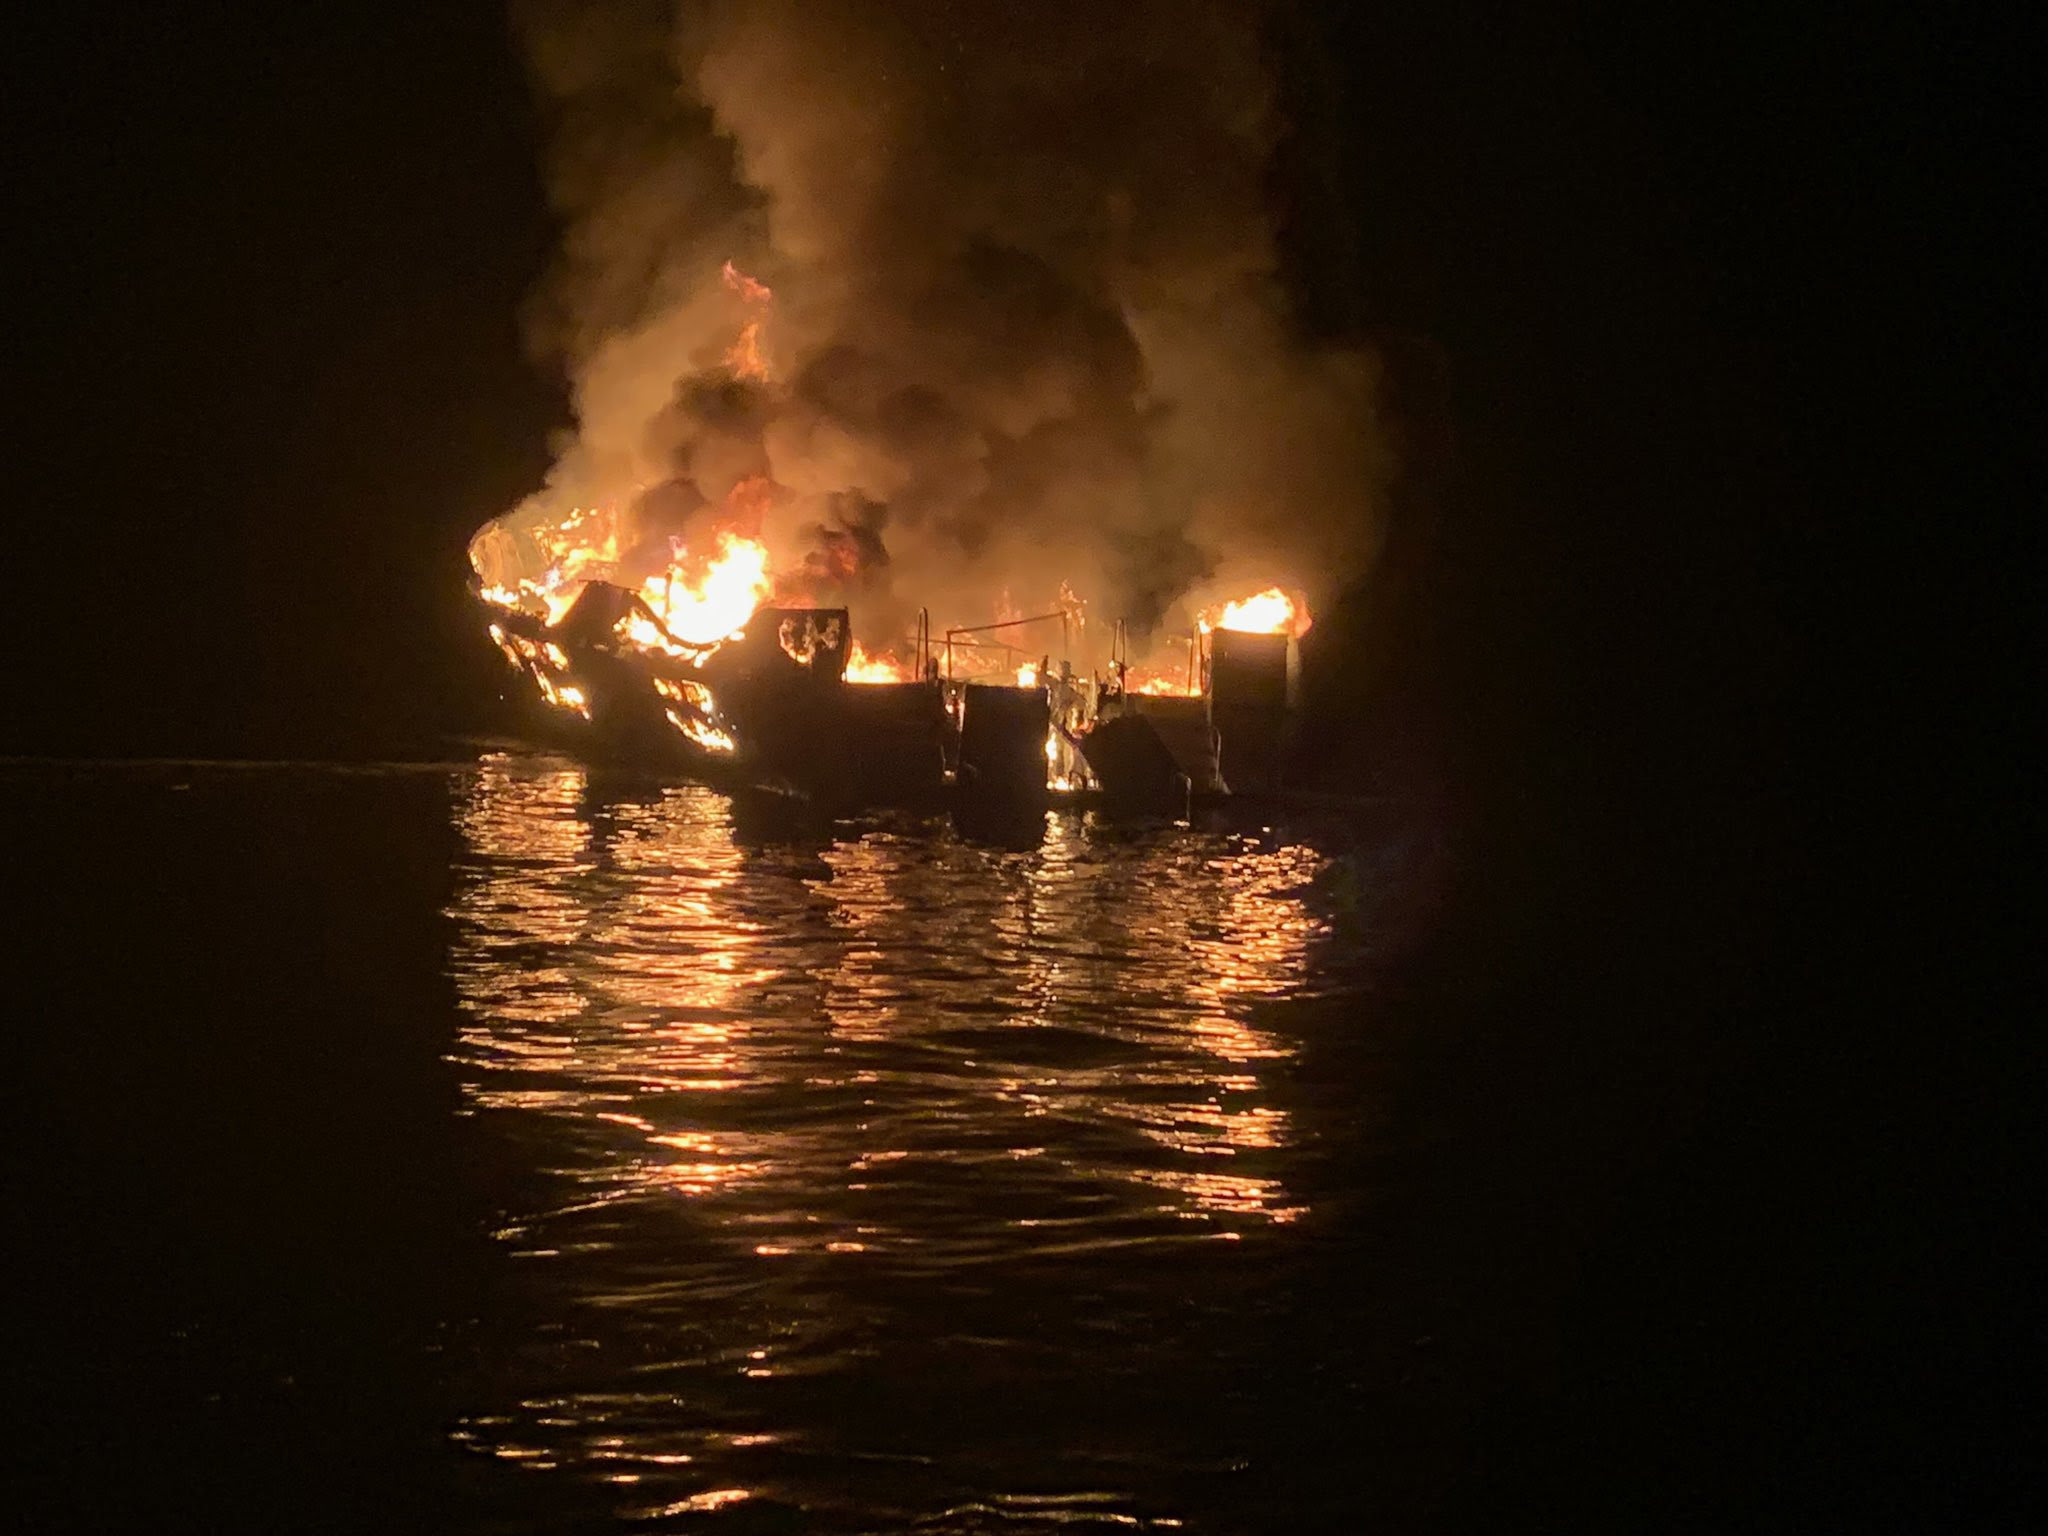 Q Anon: Look Who Was on Board the Boat That Burned and Claimed 34 Lives